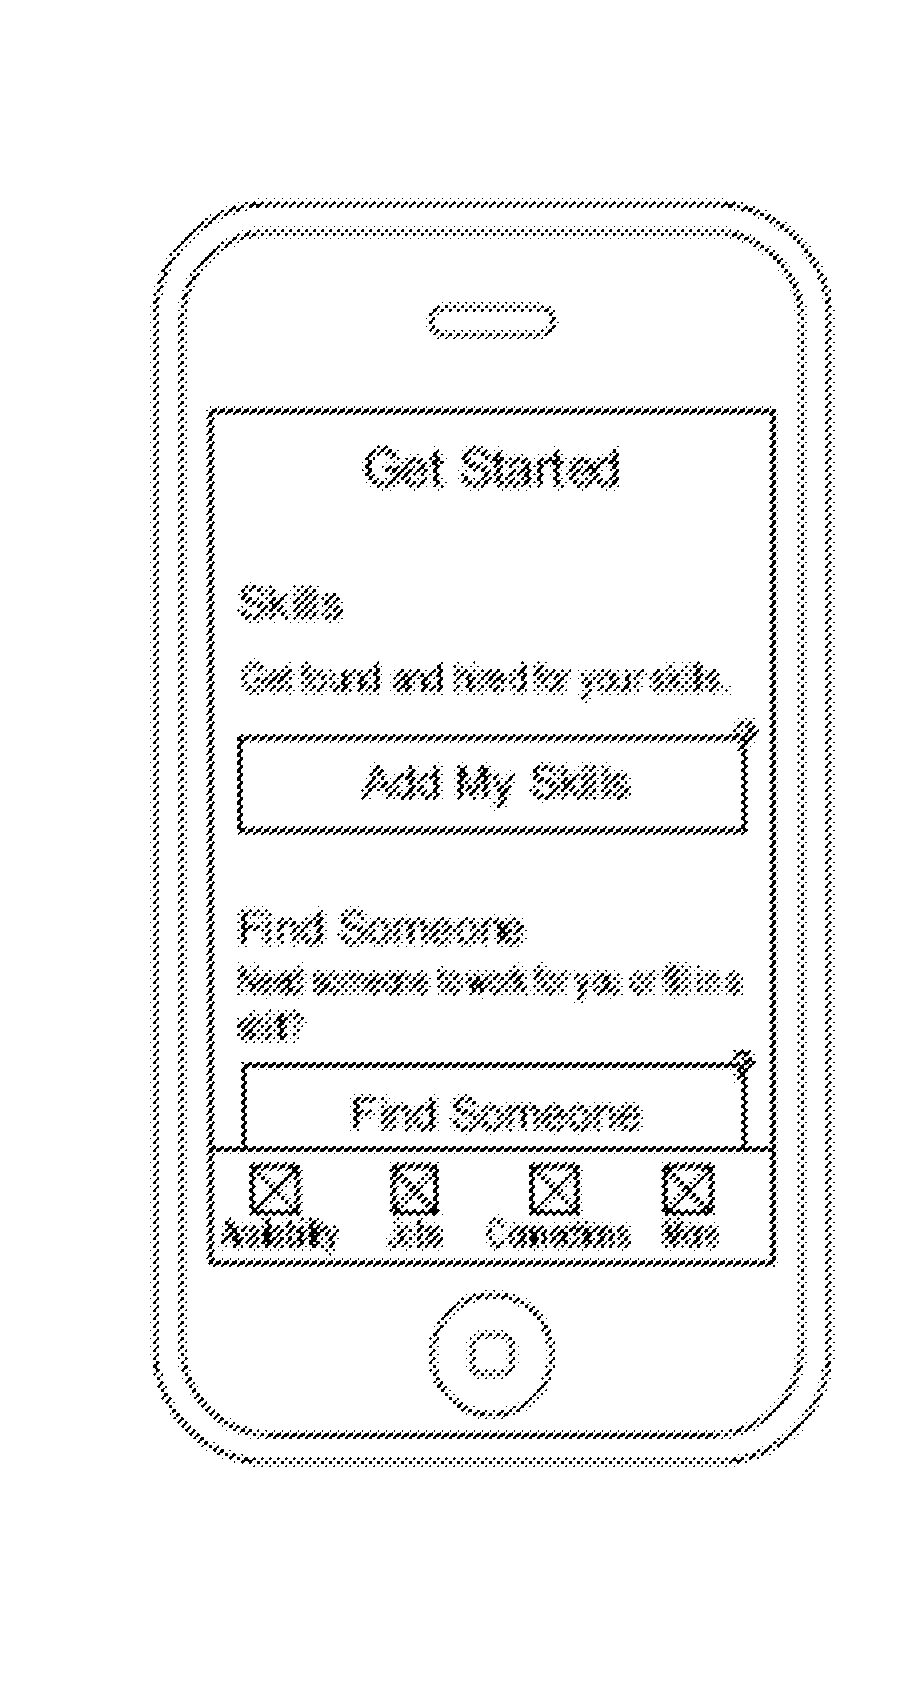 Web and mobile based scheduler and methods for identifying employment networking opportunities utilizing geolocation